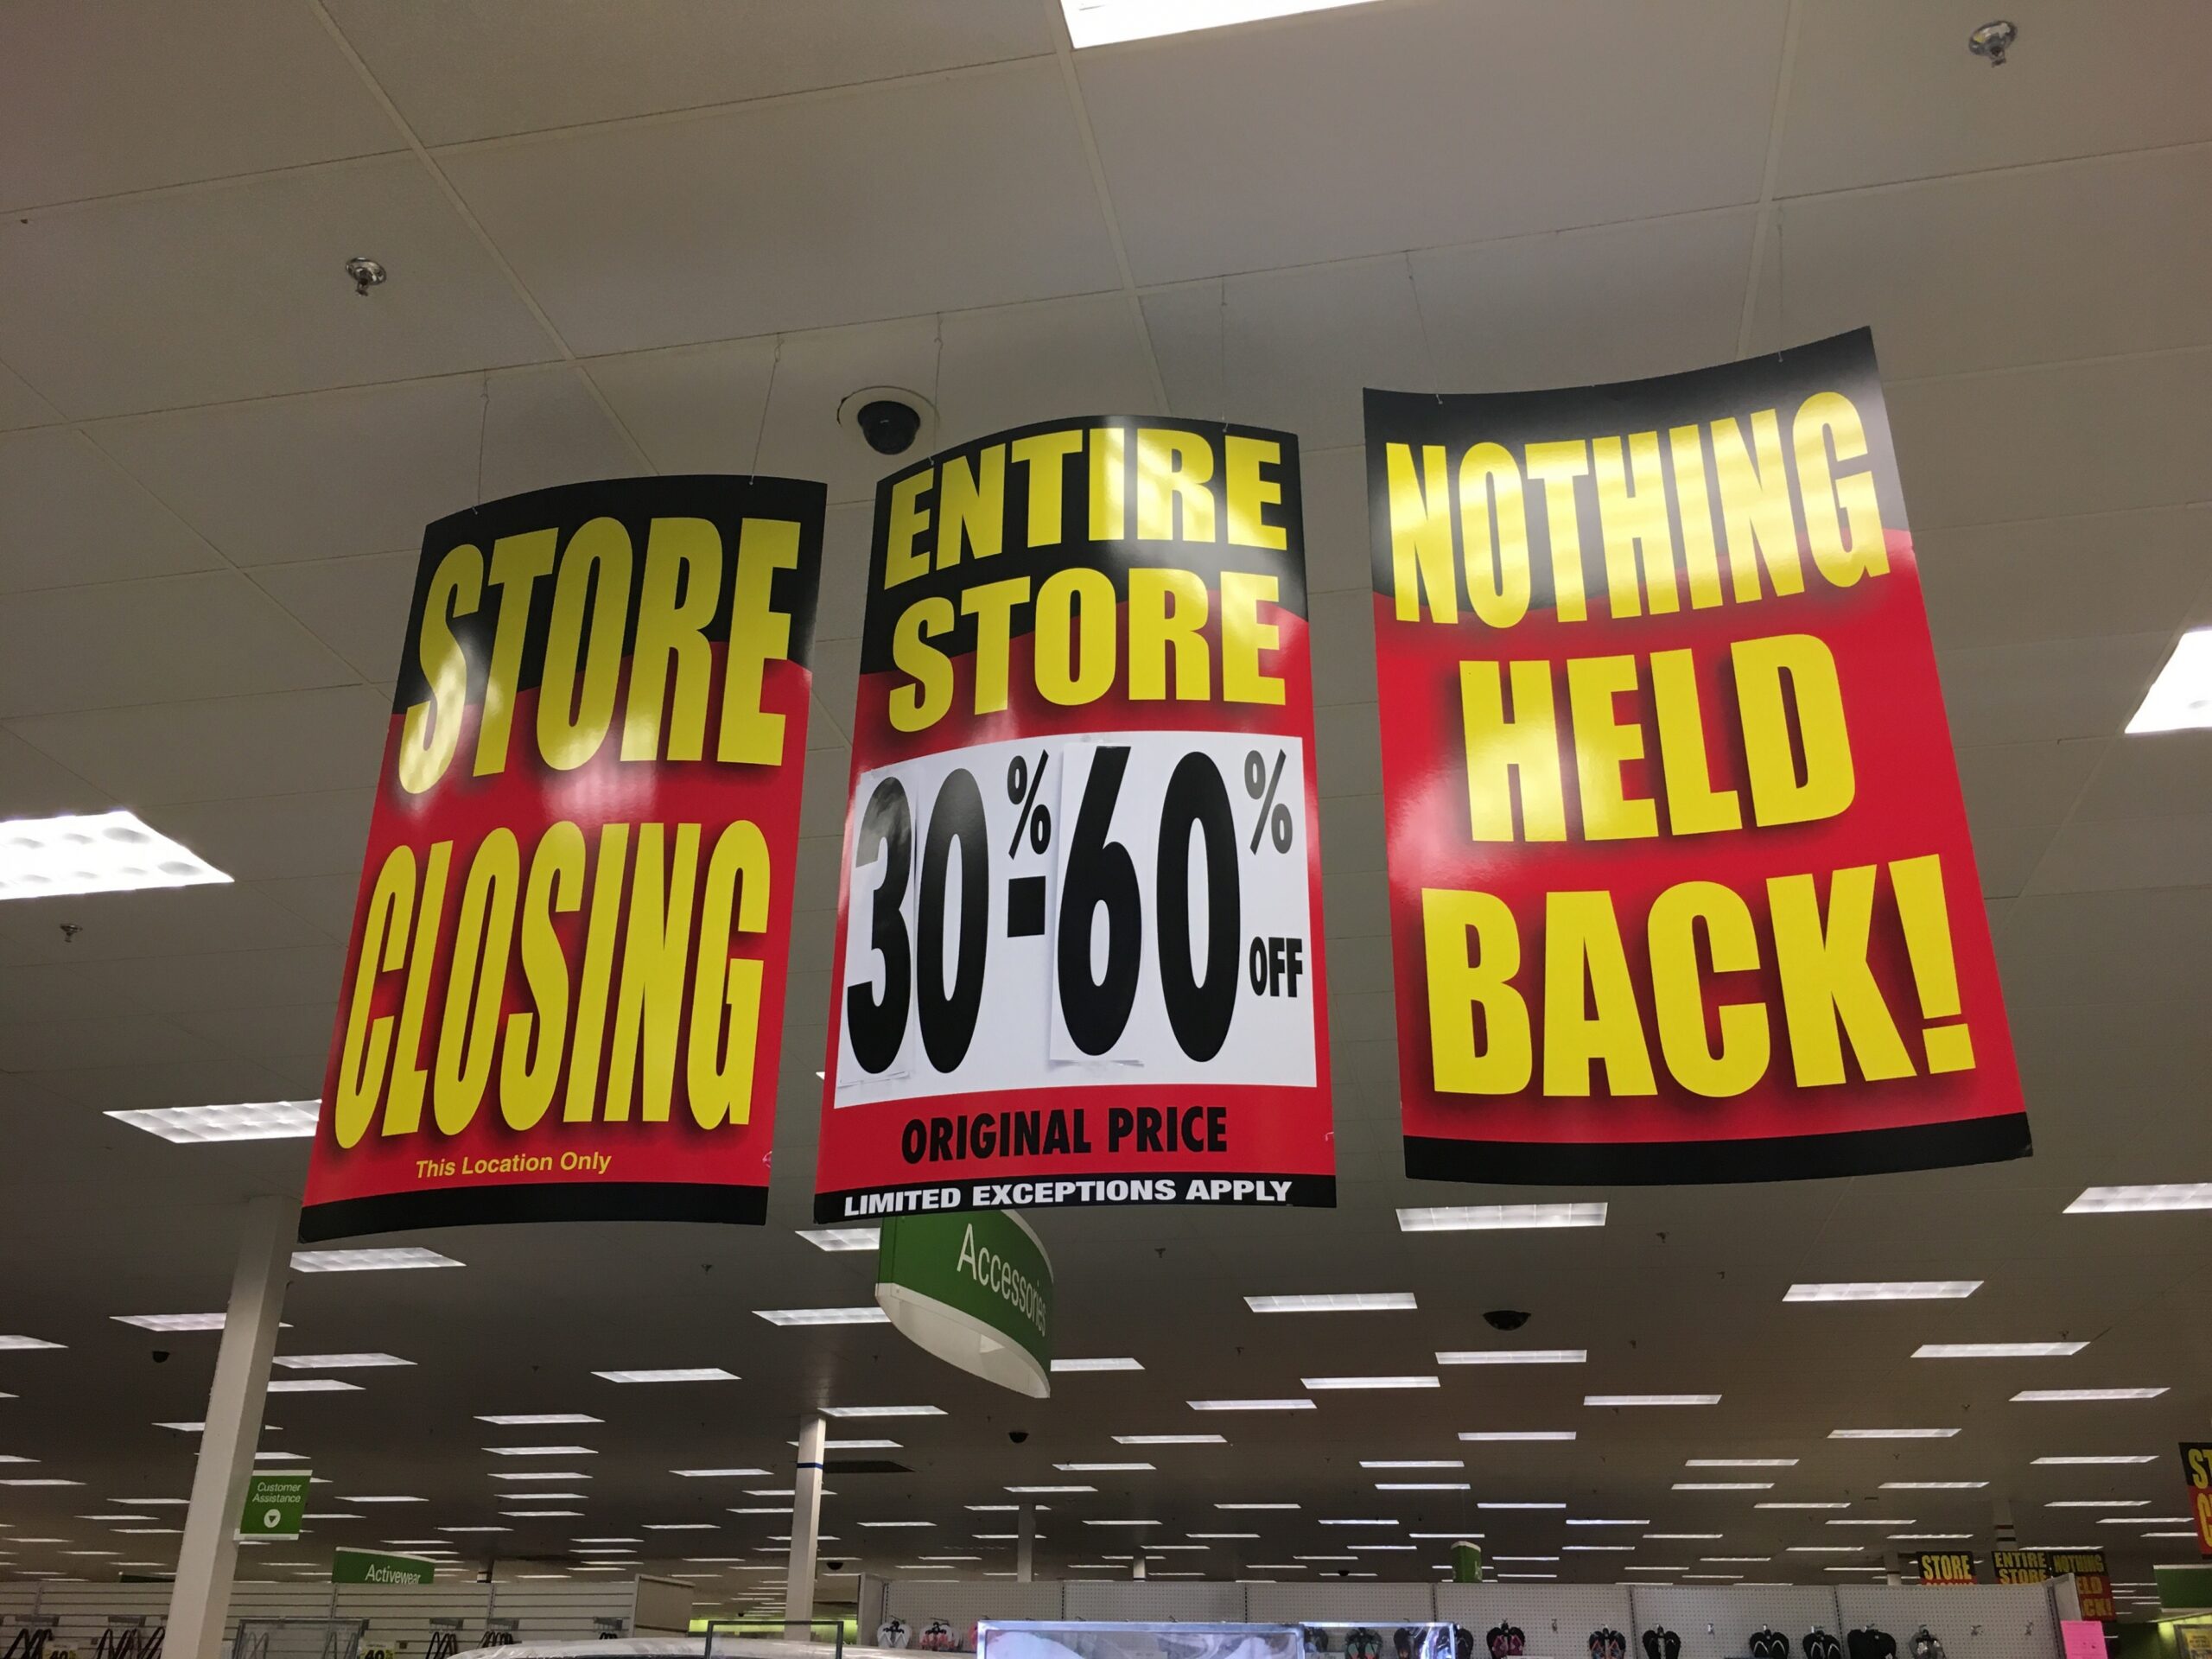 Store closing signs advertise sales